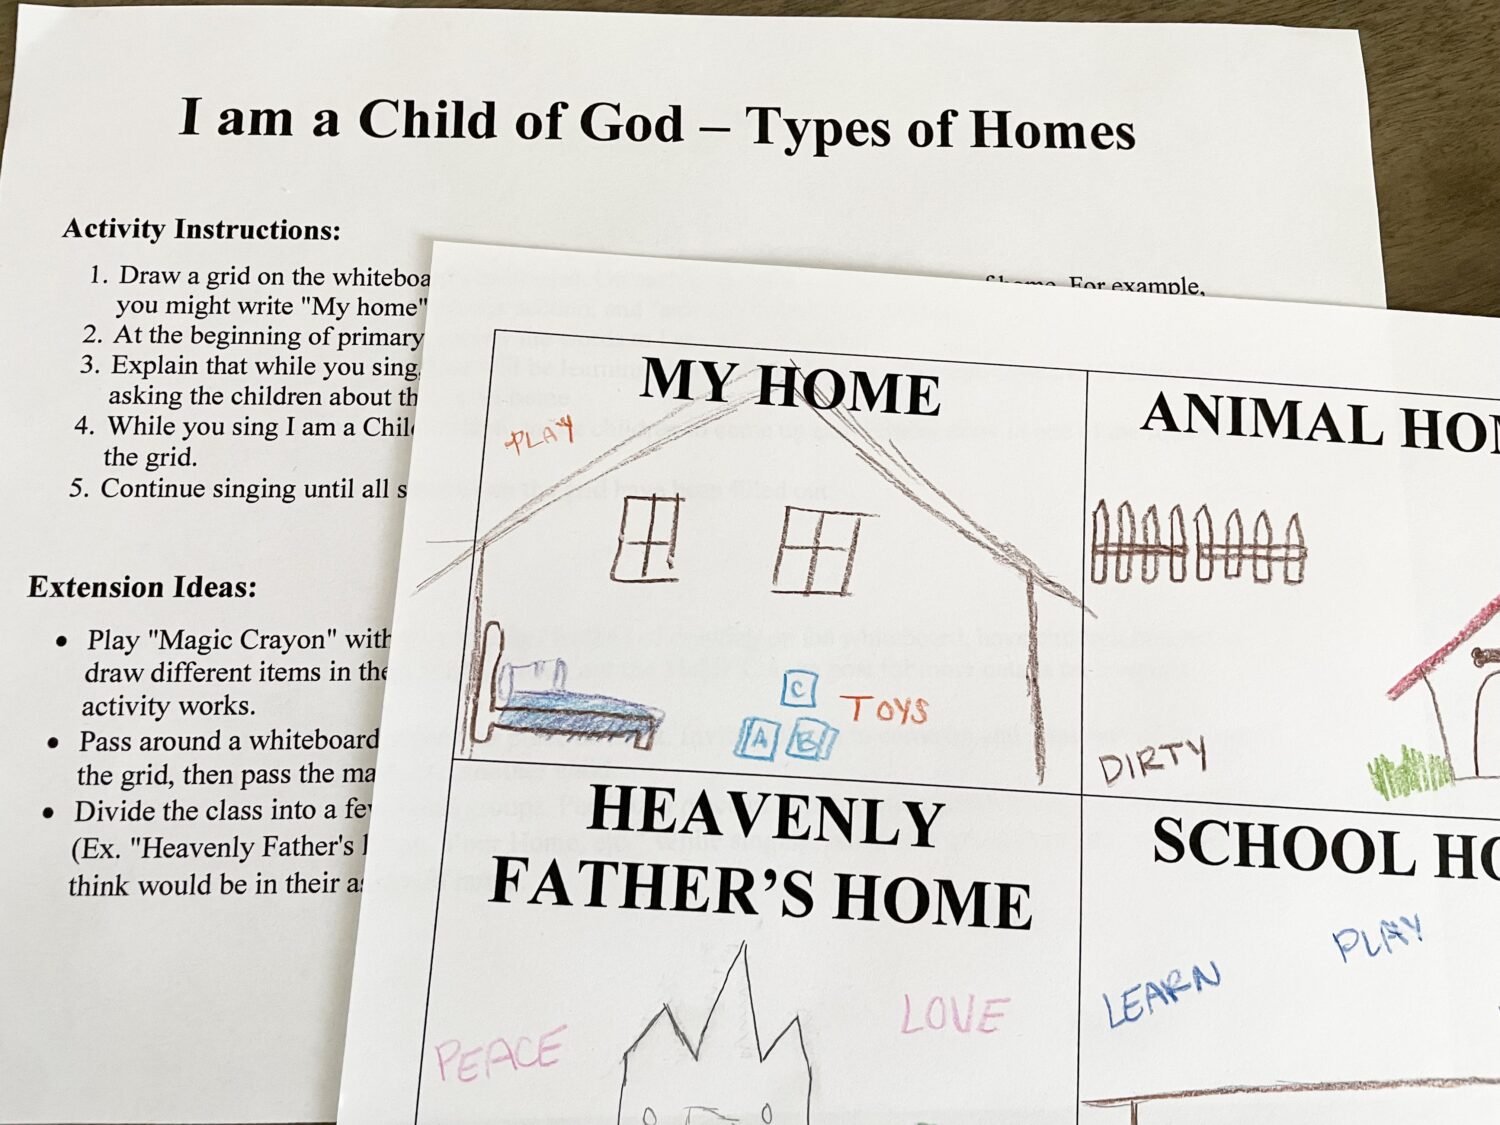 I am a Child of God - Types of Homes Easy singing time ideas for Primary Music Leaders IMG 6203 e1647554381397